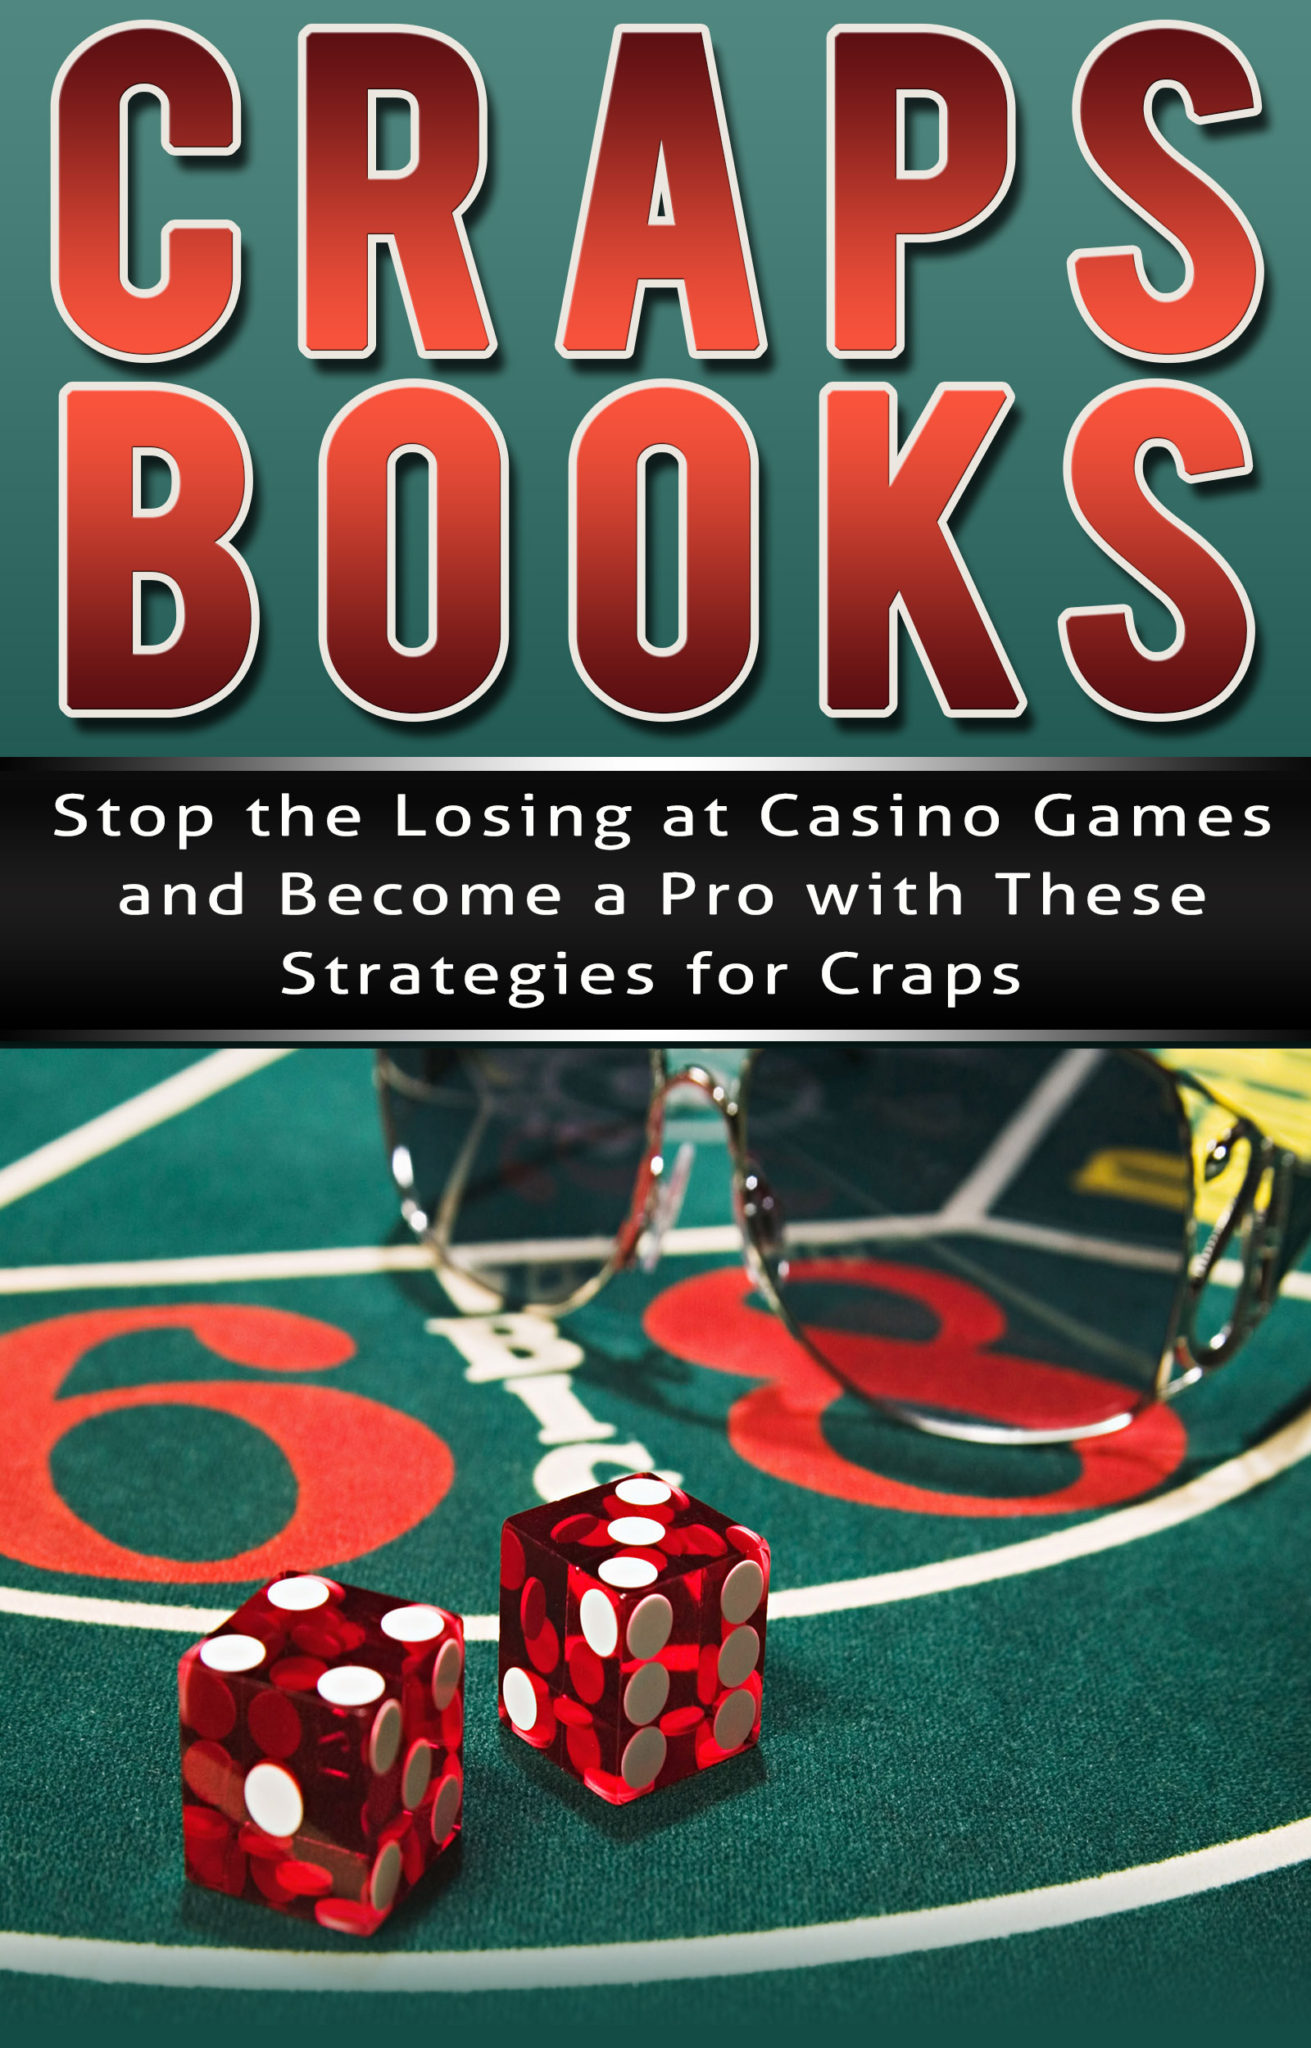 FREE: Craps Books: Stop the Losing at Casino Games and Become a Pro with These Strategies for Craps by Brent R